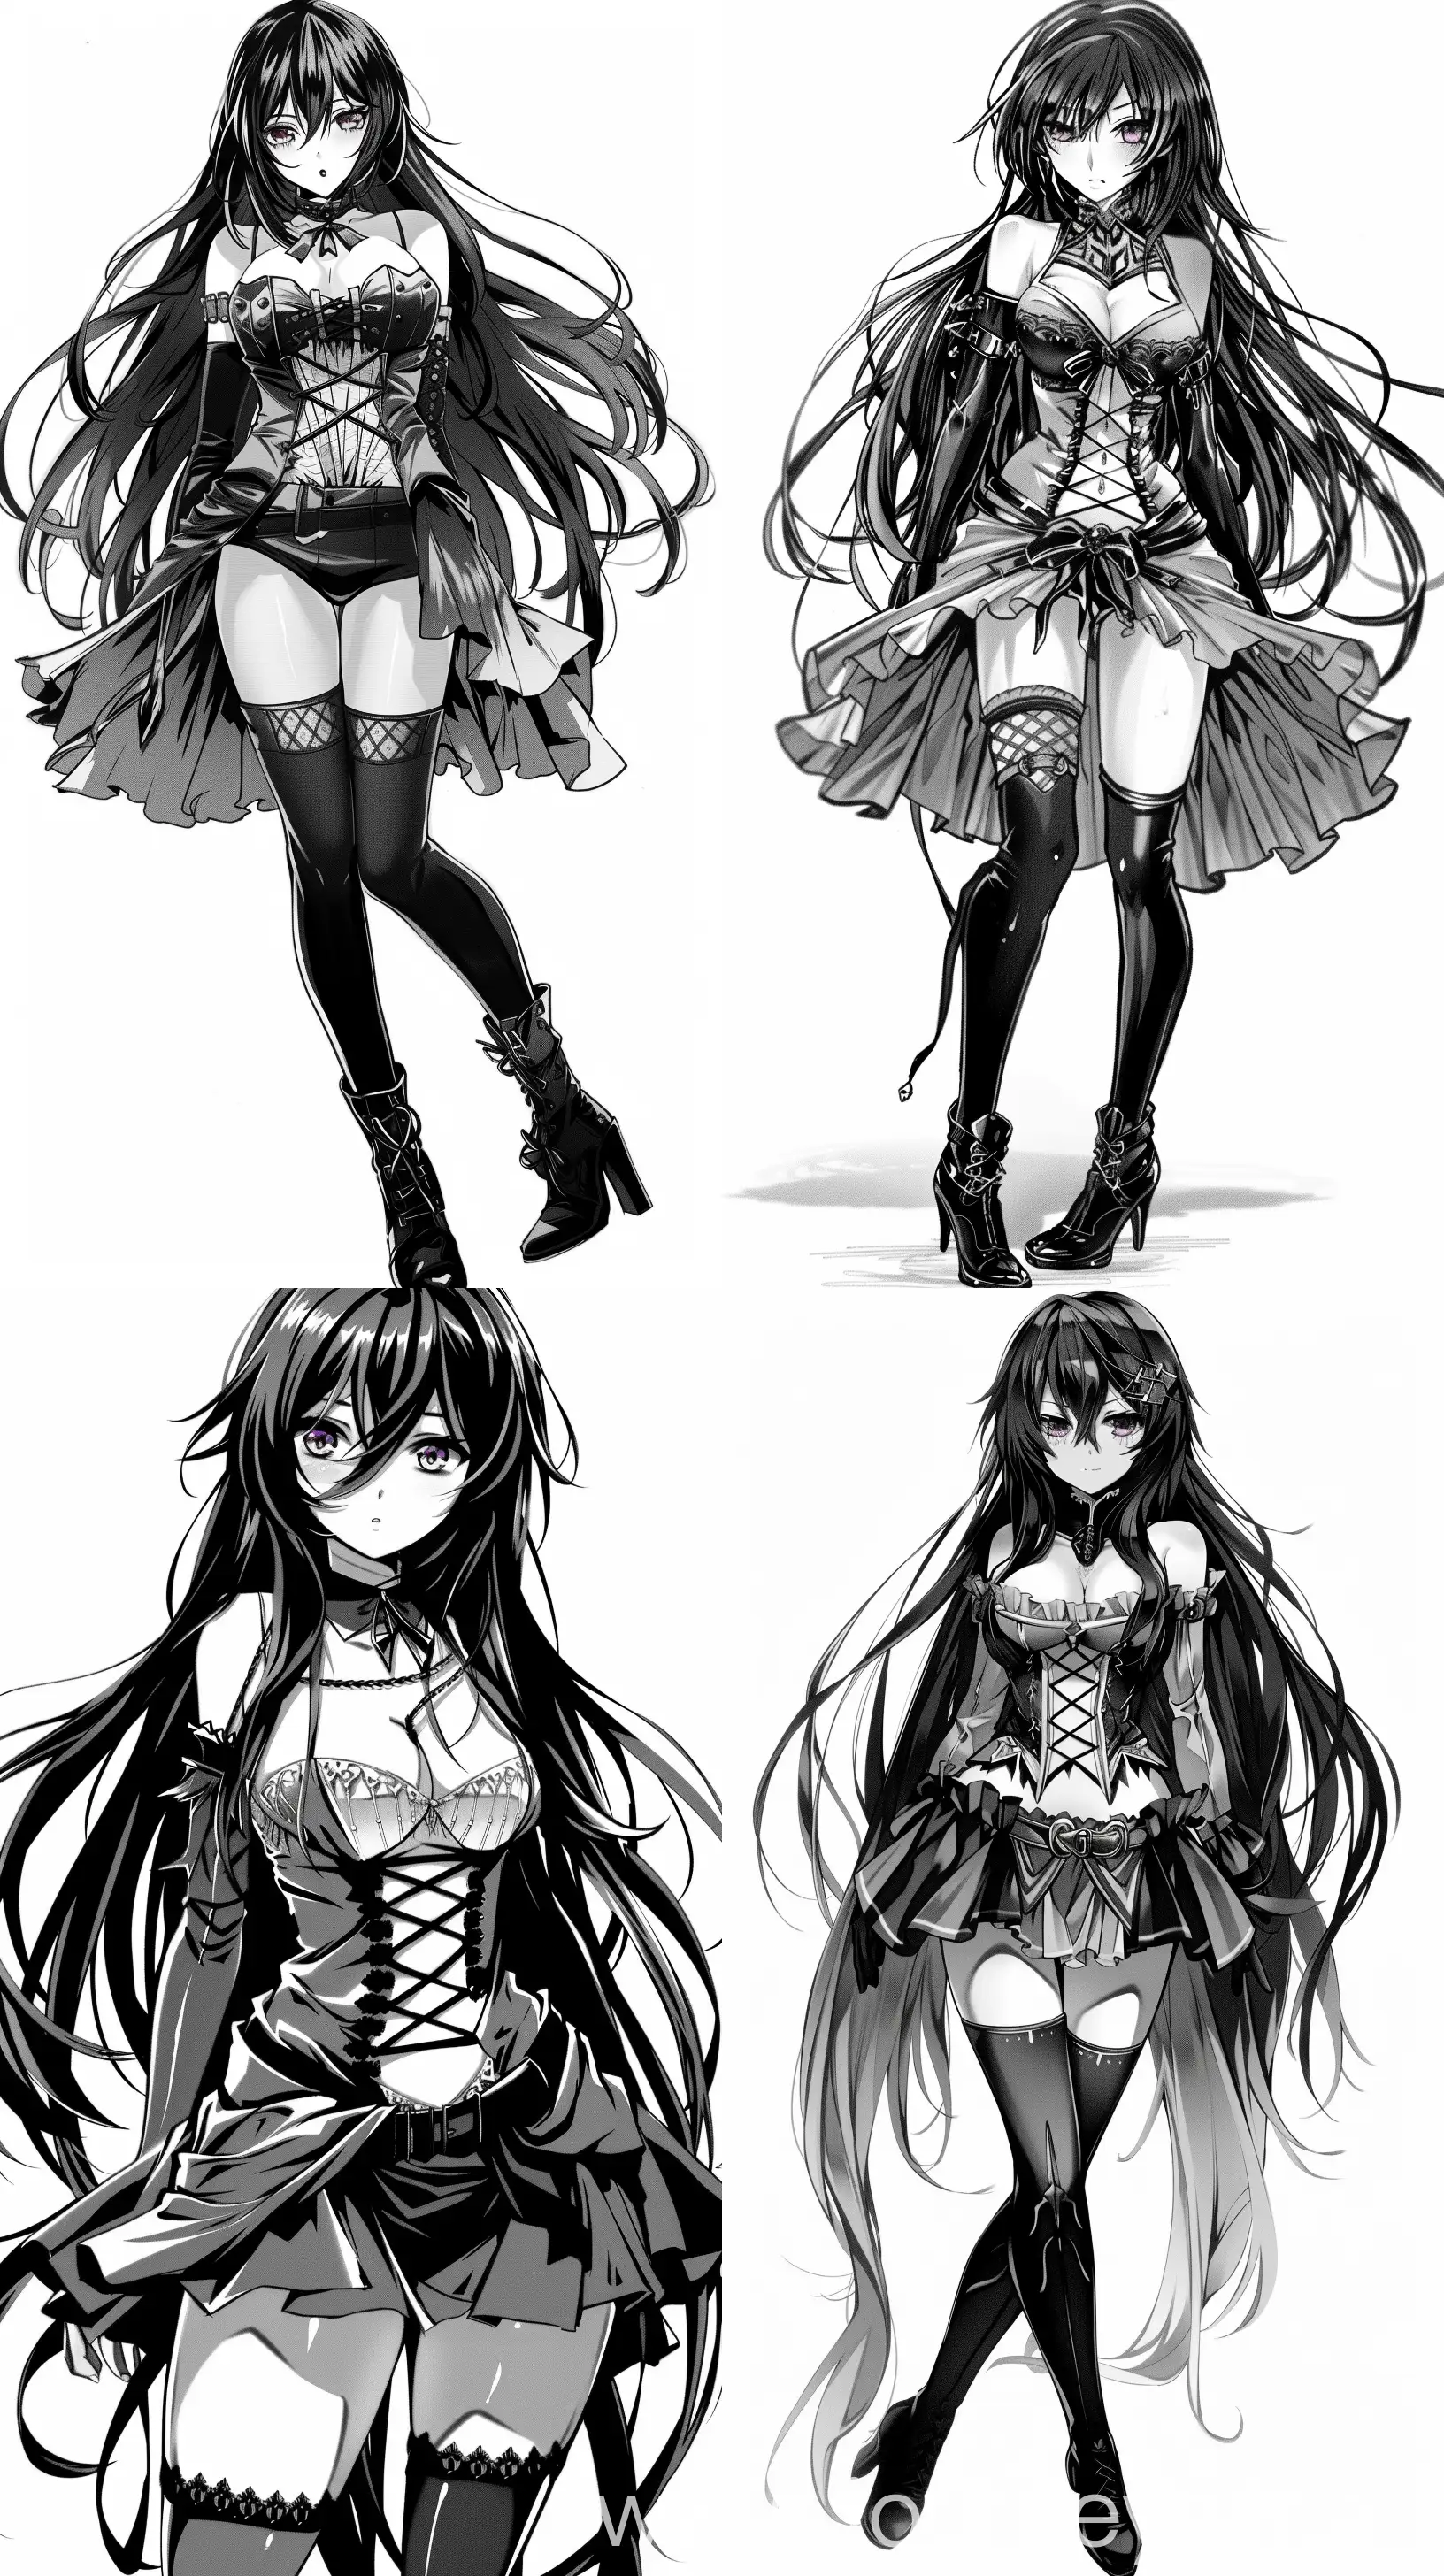 A stunning manga-style girl in black and white, her features exquisitely rendered with intricate shading and line work. Her long, raven-black hair flows behind her in a cascade of silk, expertly framing her delicate face. Her eyes are a piercing shade of violet, filled with determination and focus. She wears a unique and stylish outfit that accentuates her defensive stance: a sleeveless top with intricate lacing over a tight-fitting corset, revealing her toned midsection and accentuating her modest yet curvaceous figure. Her bottom half consists of a flowing skirt that flares out slightly at the hem, giving her an added sense of movement and agility. Her legs are clad in black thigh-high socks that reach just below the knee, and she wears a pair of sturdy, but fashionable boots with chunky heels:: --aspect 9:16 